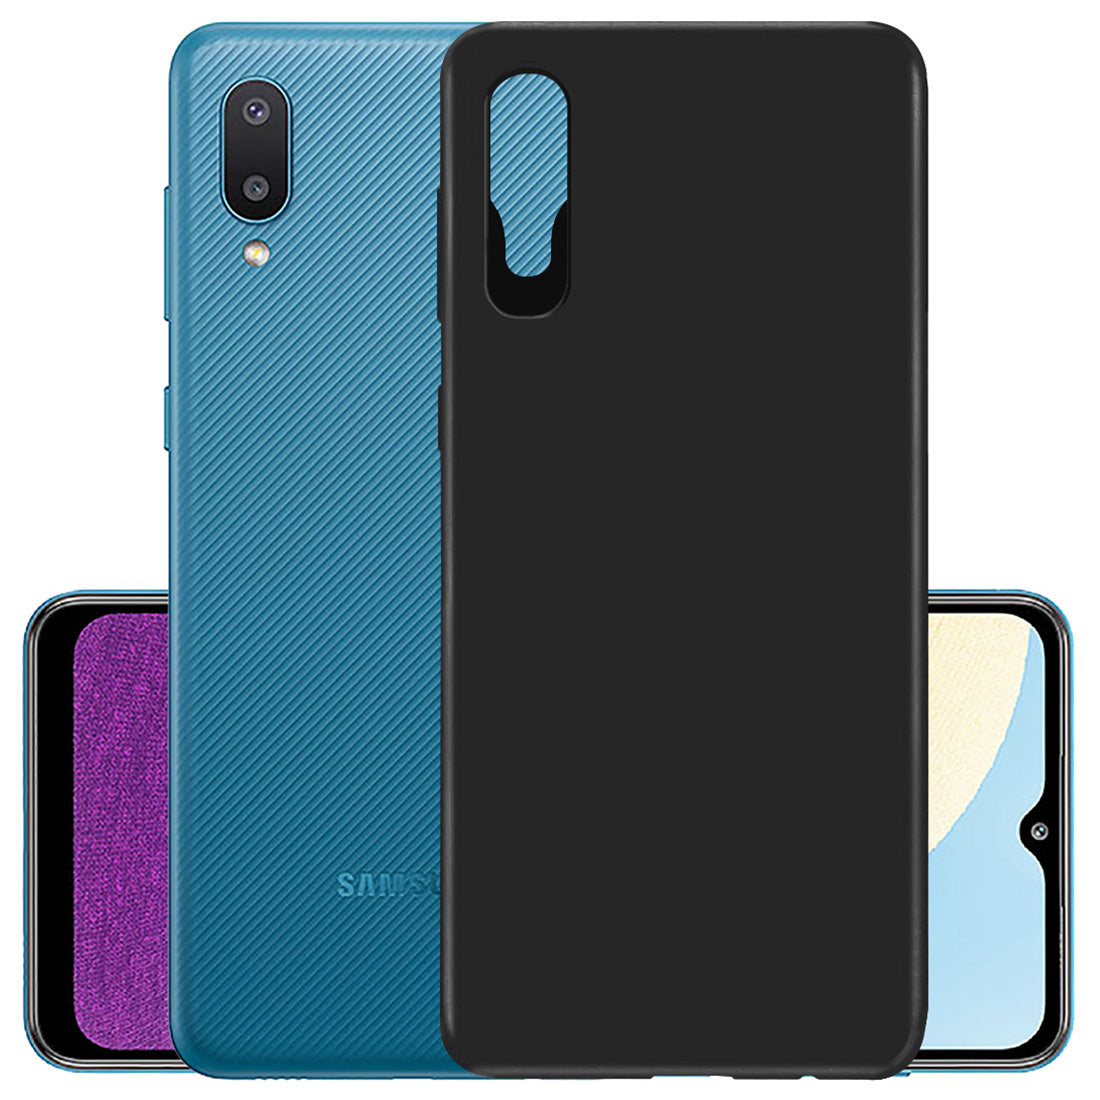 Matte Finish TPU Back Cover for Samsung Galaxy A02 / M02